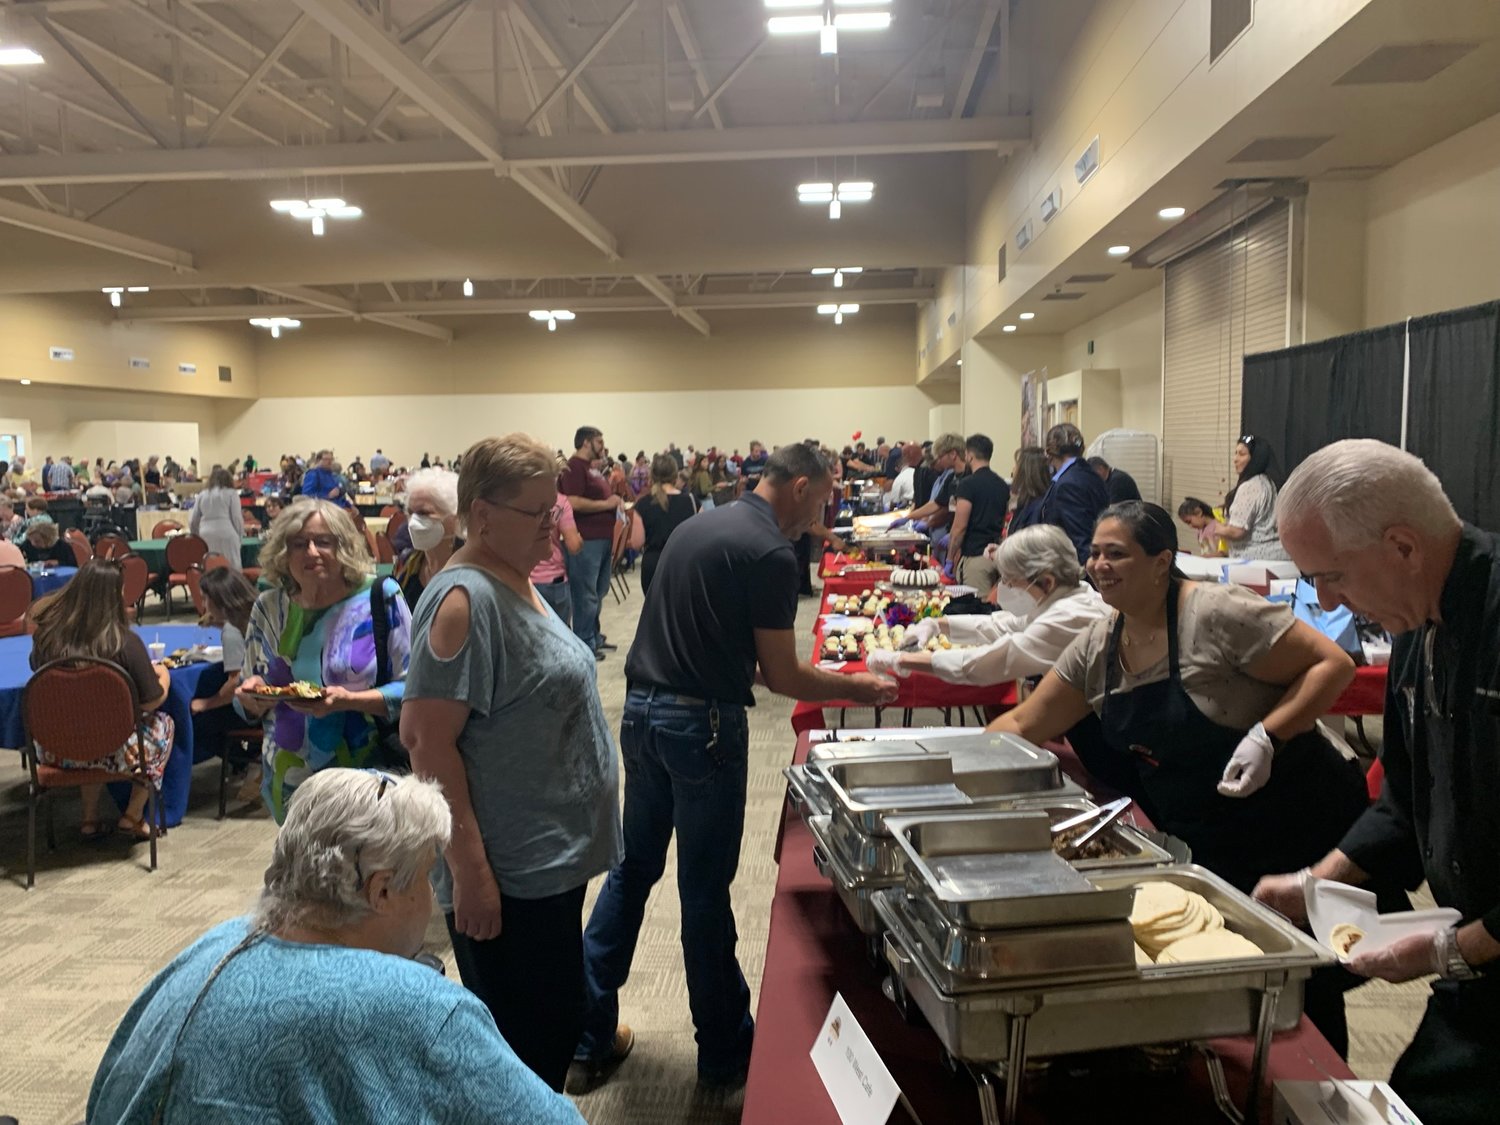 The Las Cruces Convention Center fills up with hungry people Thursday, May 12, for the Rotary Club-sponsored Taste of Las Cruces event, raising funds for Casa de Peregrinos.